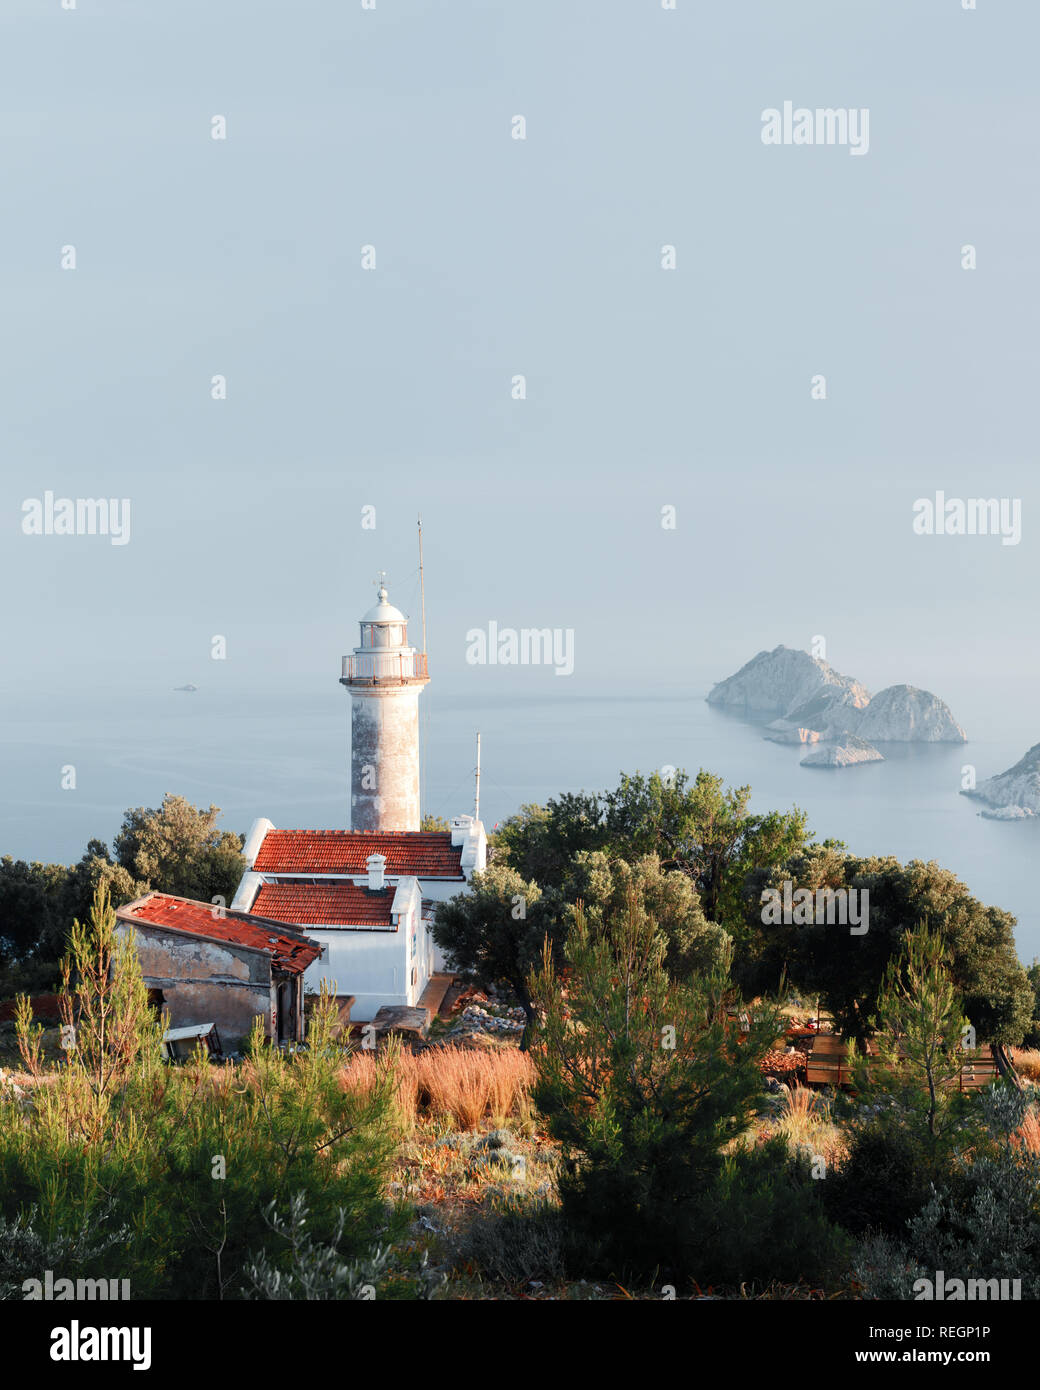 Picturesque scene with lighthouse on Gelidonya cape and small islands in Mediterranean sea. Landscape photography Stock Photo